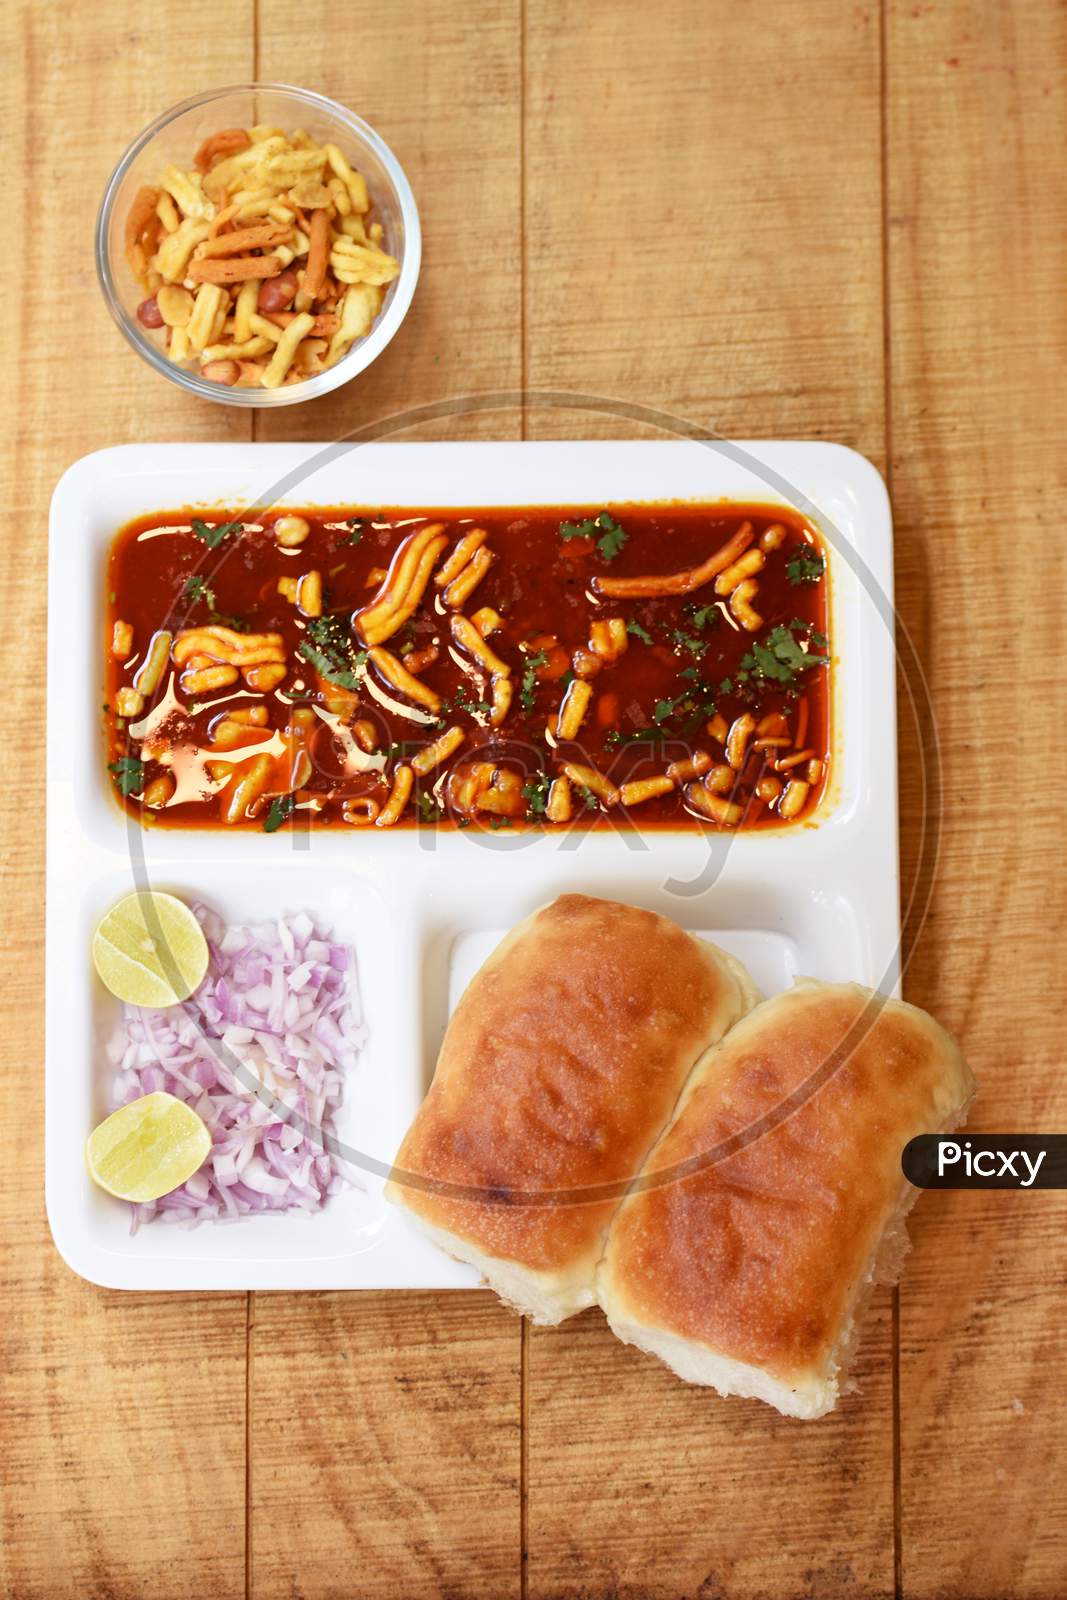 Indian Delicious "Misal Pav" With Onion And Coriander Spread On Top Of Curry Wheat Bread